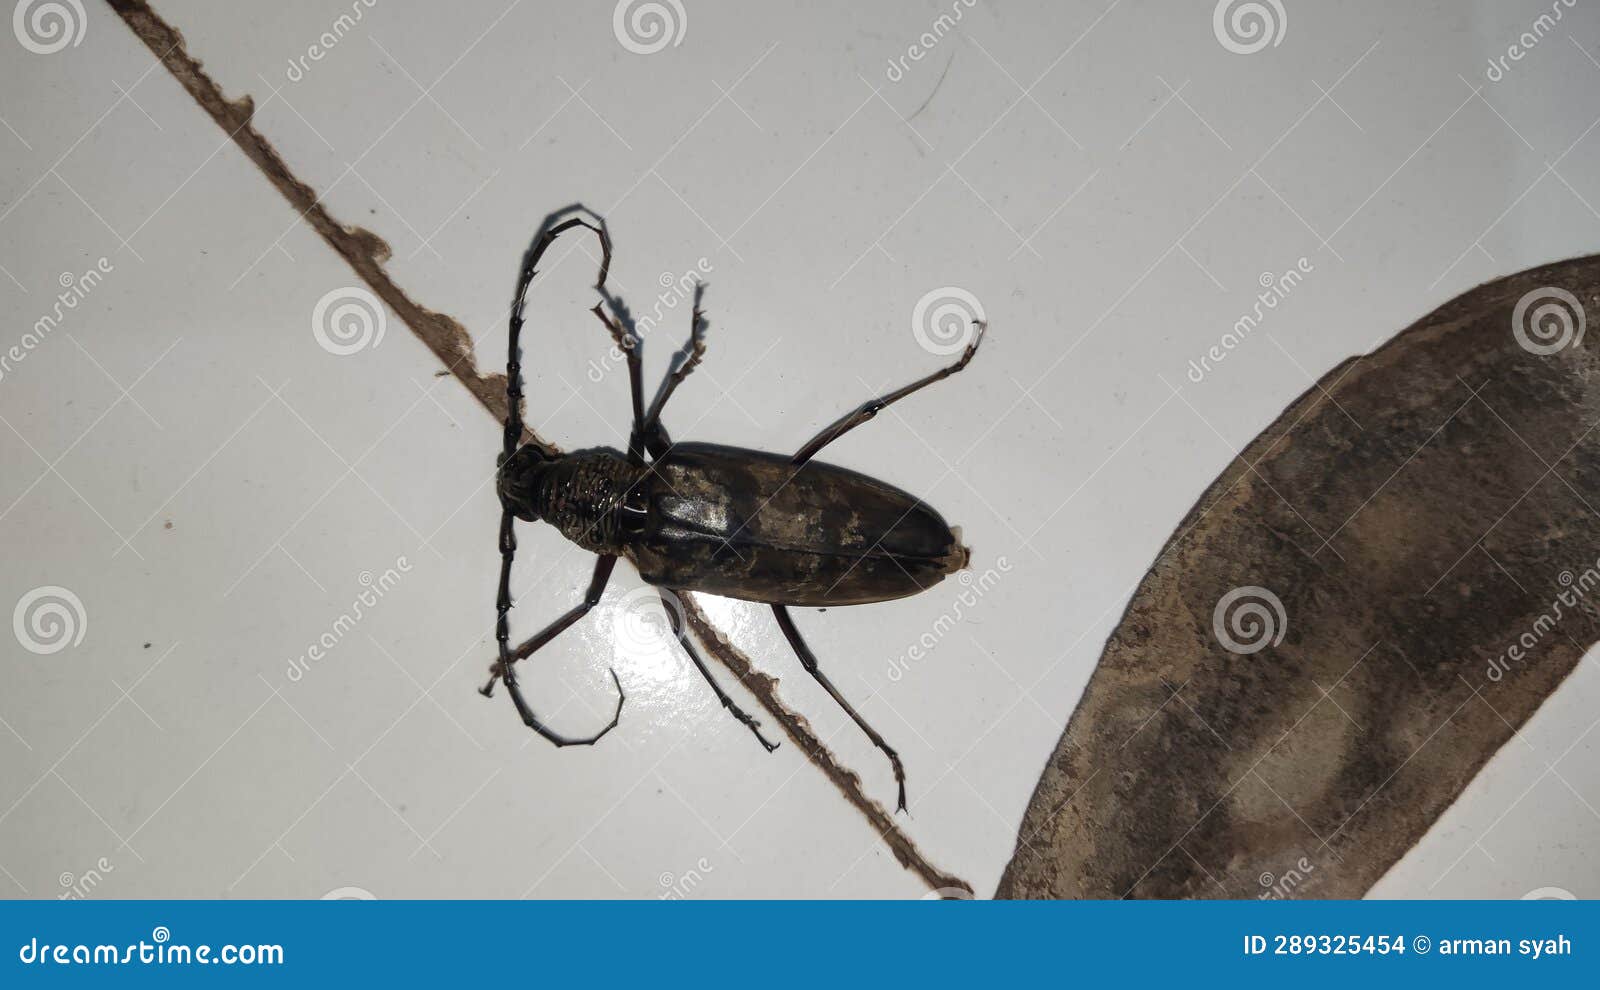 is-an-insect-with-name-batocera-dark-colored-and-backround-woth-stock